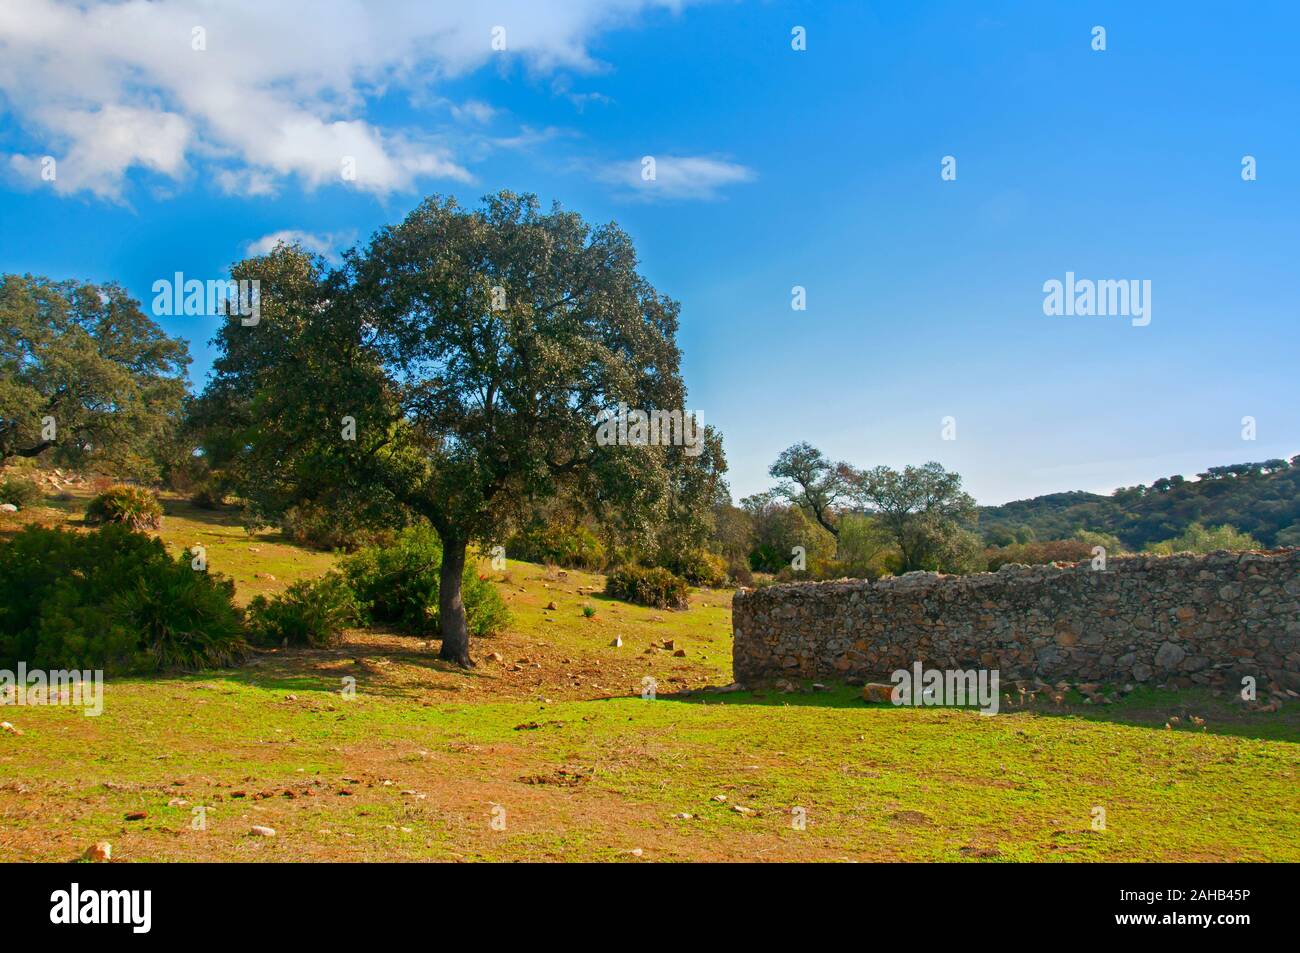 Ancient stone wall on the green dirt field, big gren trees and bushes, blue clear sky. Sunny day in Seville, Spain Stock Photo